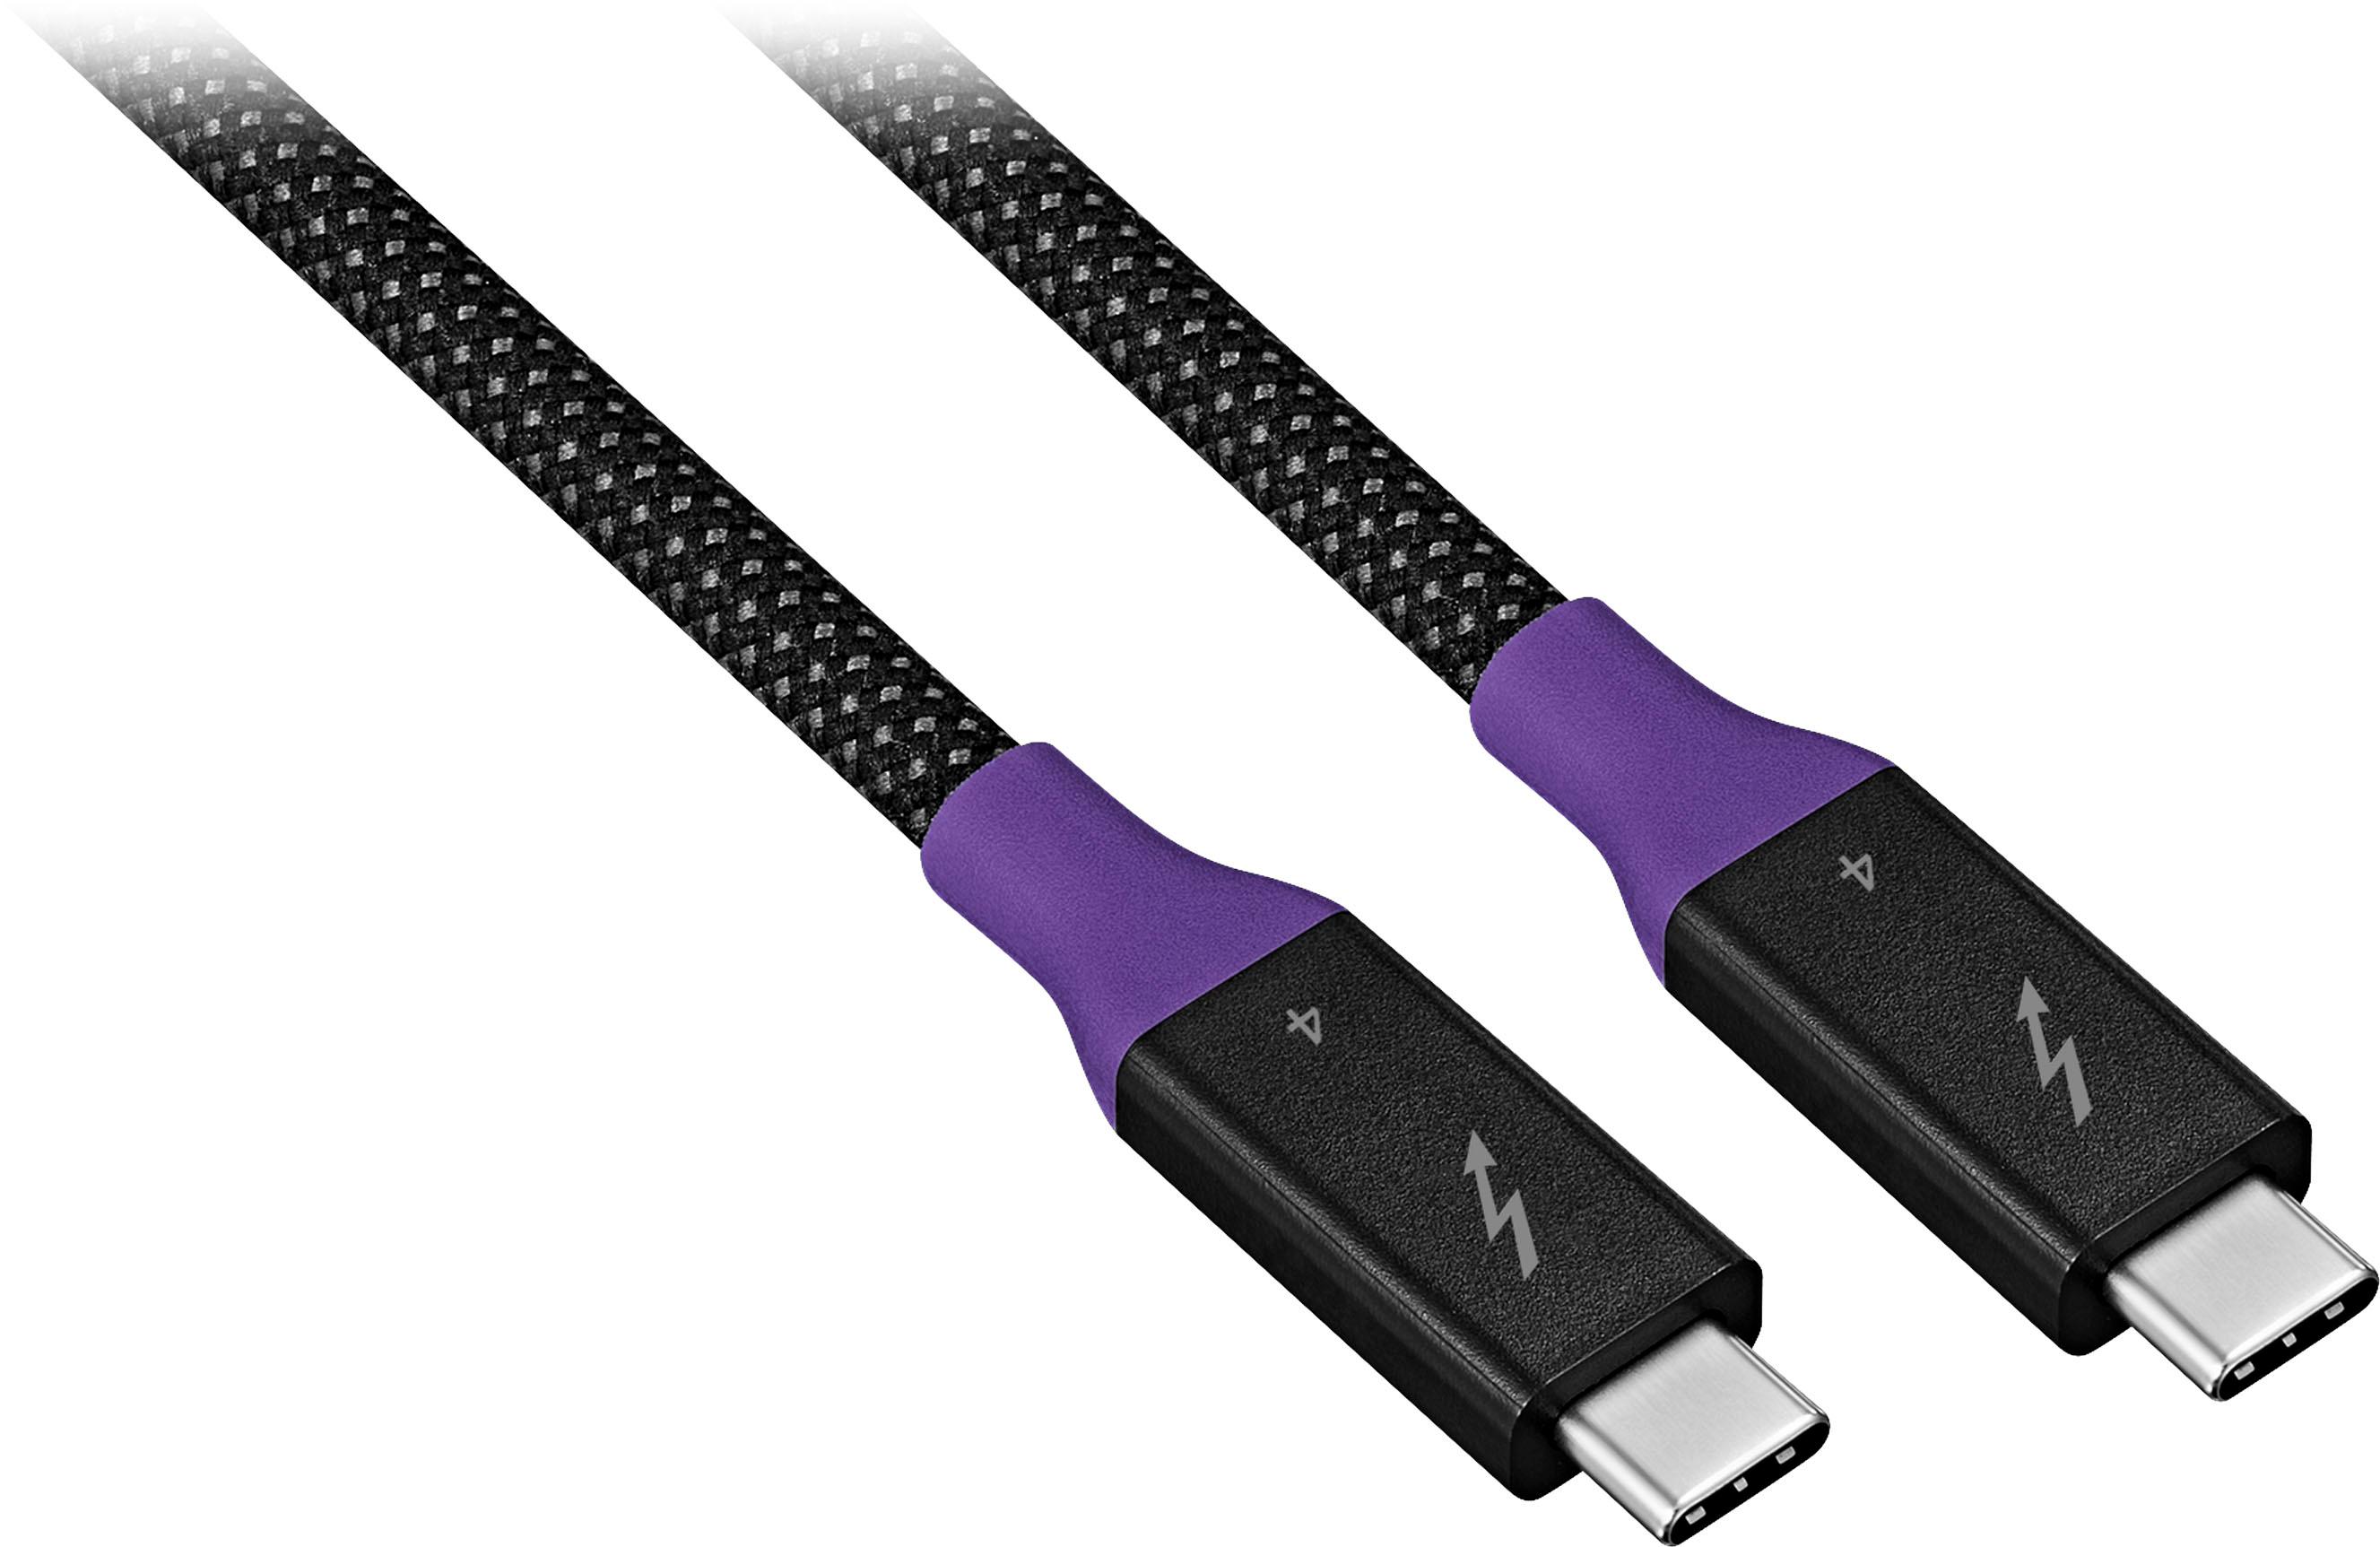 Everything You Need to Know About Thunderbolt 4 & USB Type-C Cables